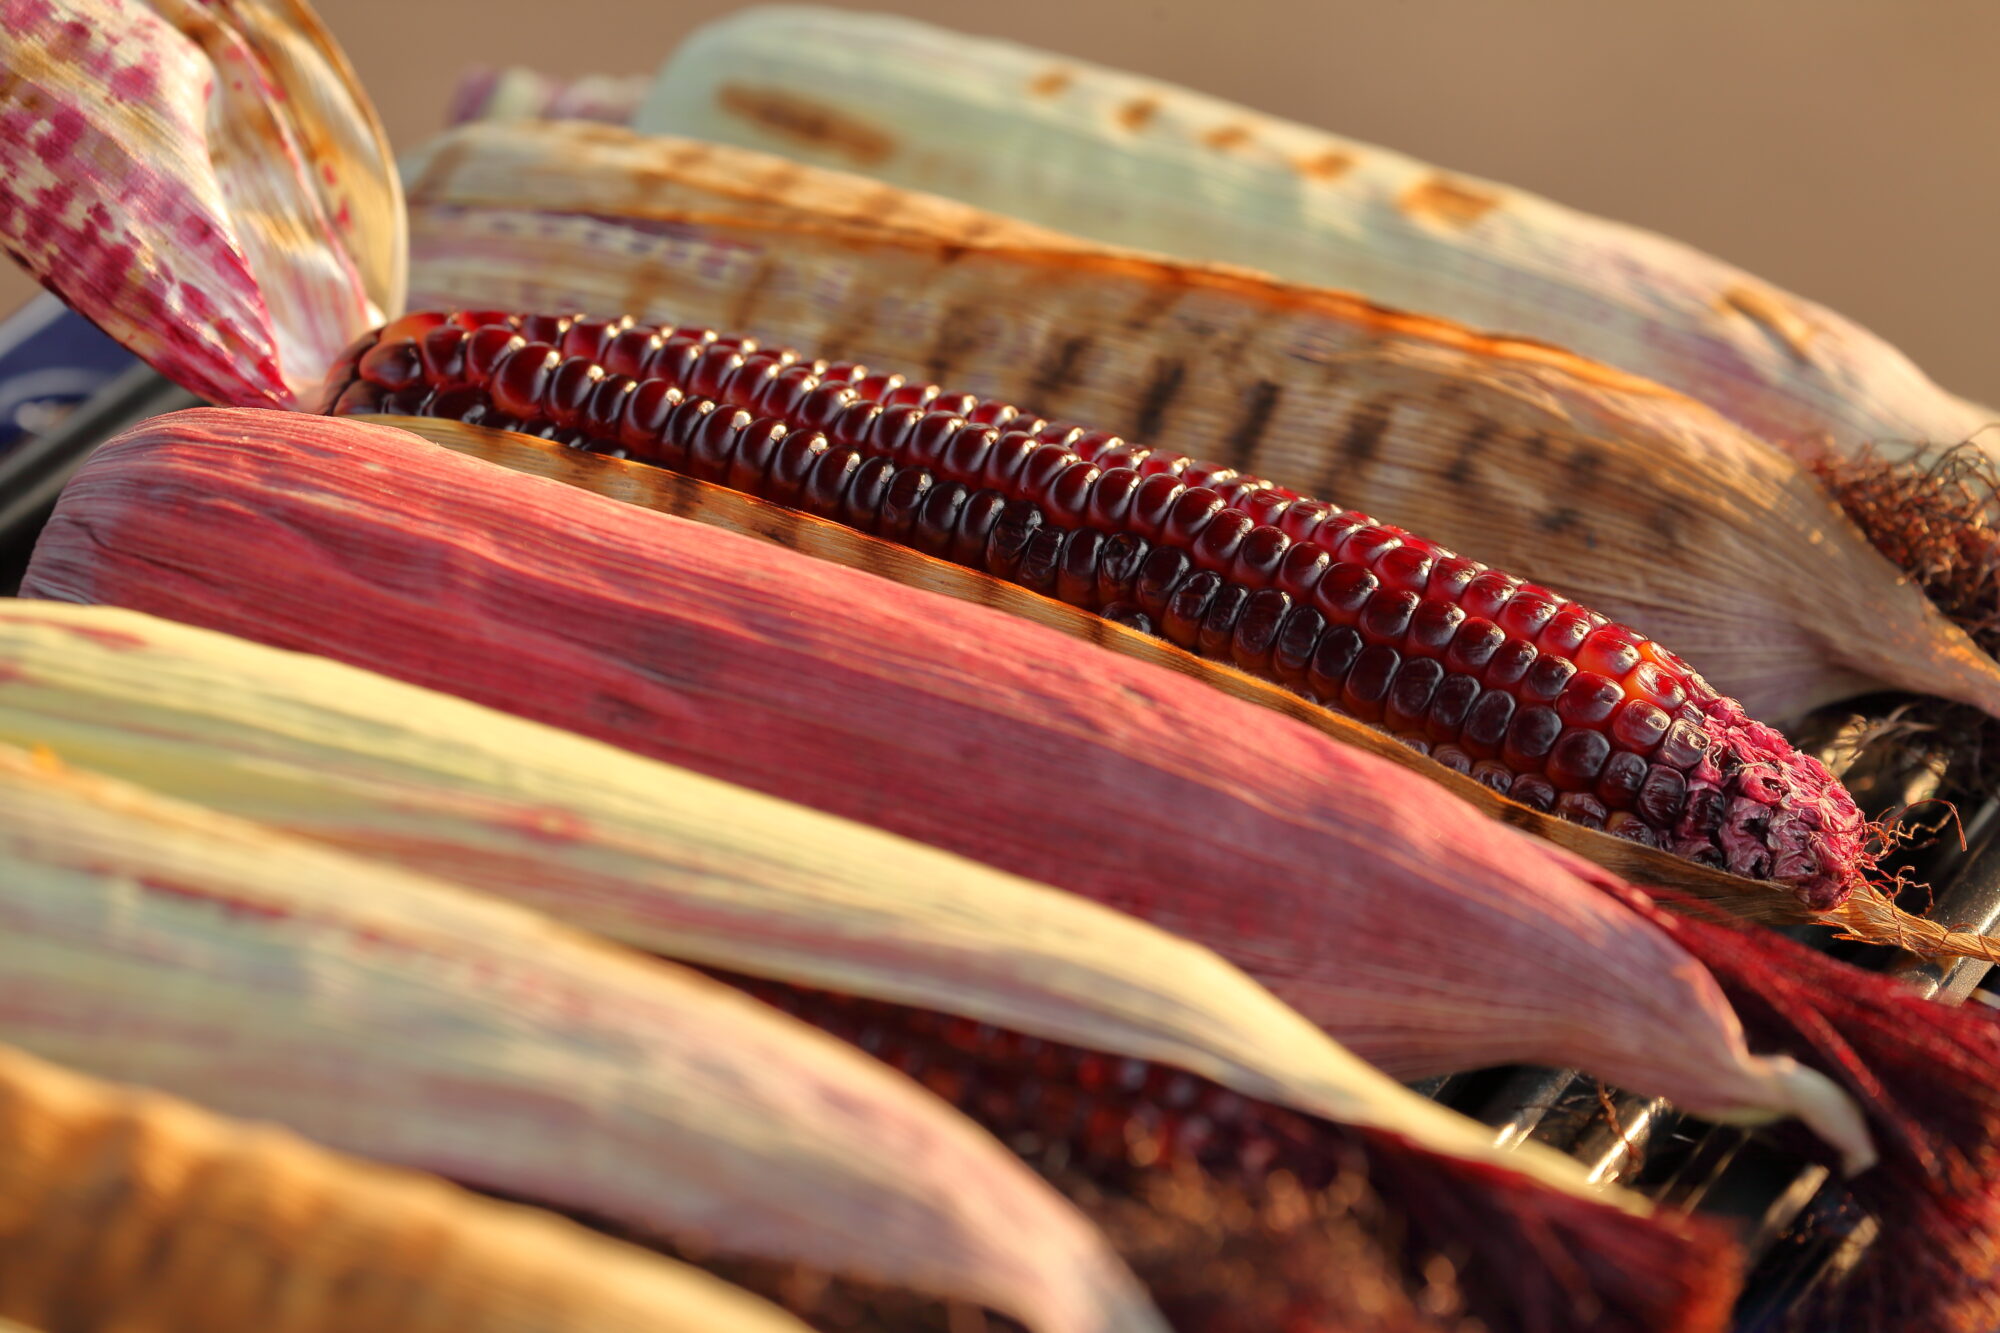 A closeup photo of a variety of ears of corn on a grill. Some of the ears have husks, while one, where the kernels are bright red, is shucked.